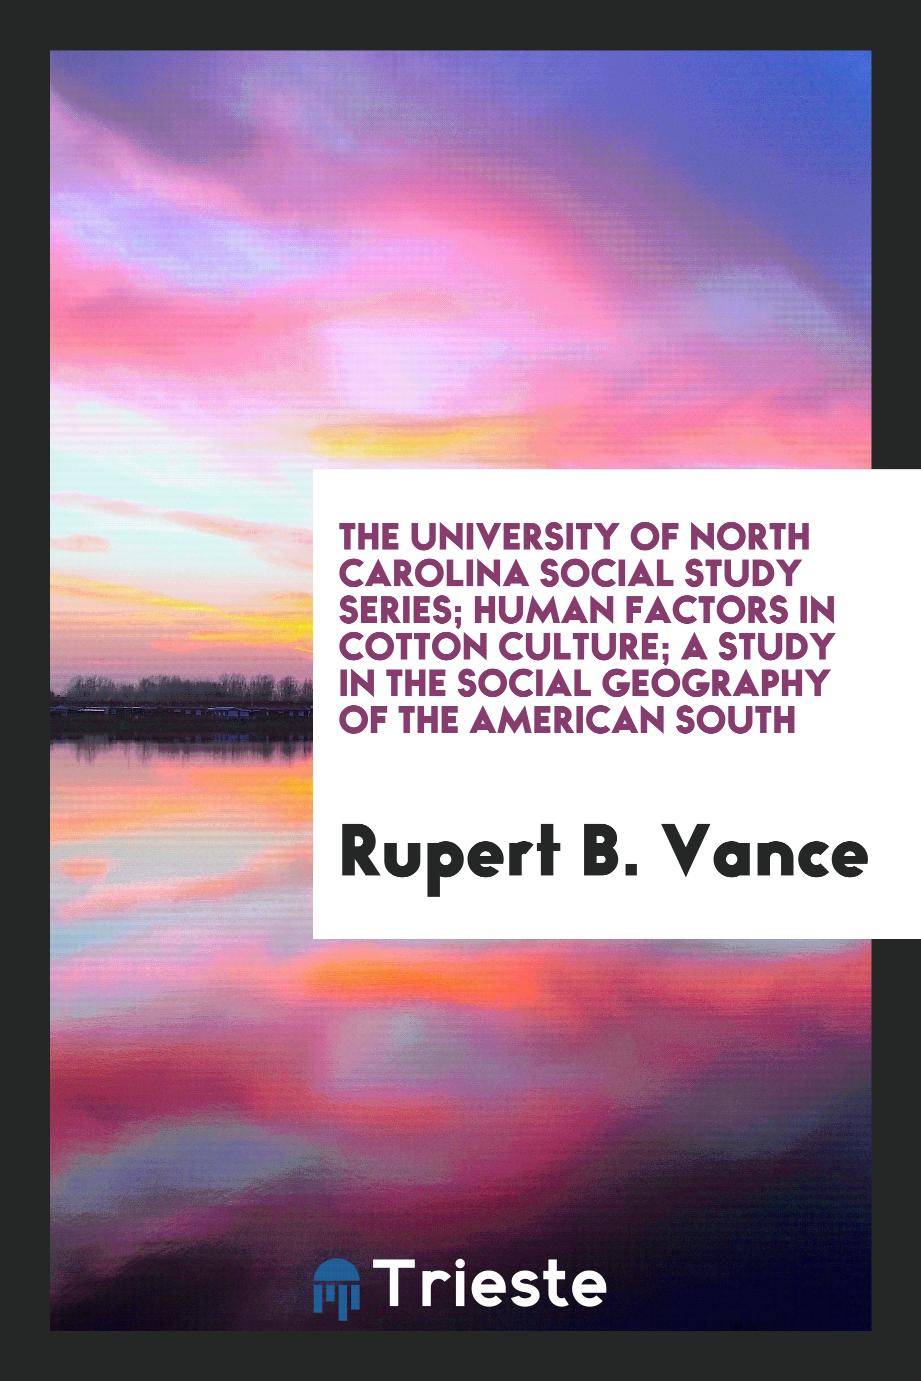 The University of North Carolina Social Study Series; Human Factors in Cotton Culture; A Study in the Social Geography of the American South